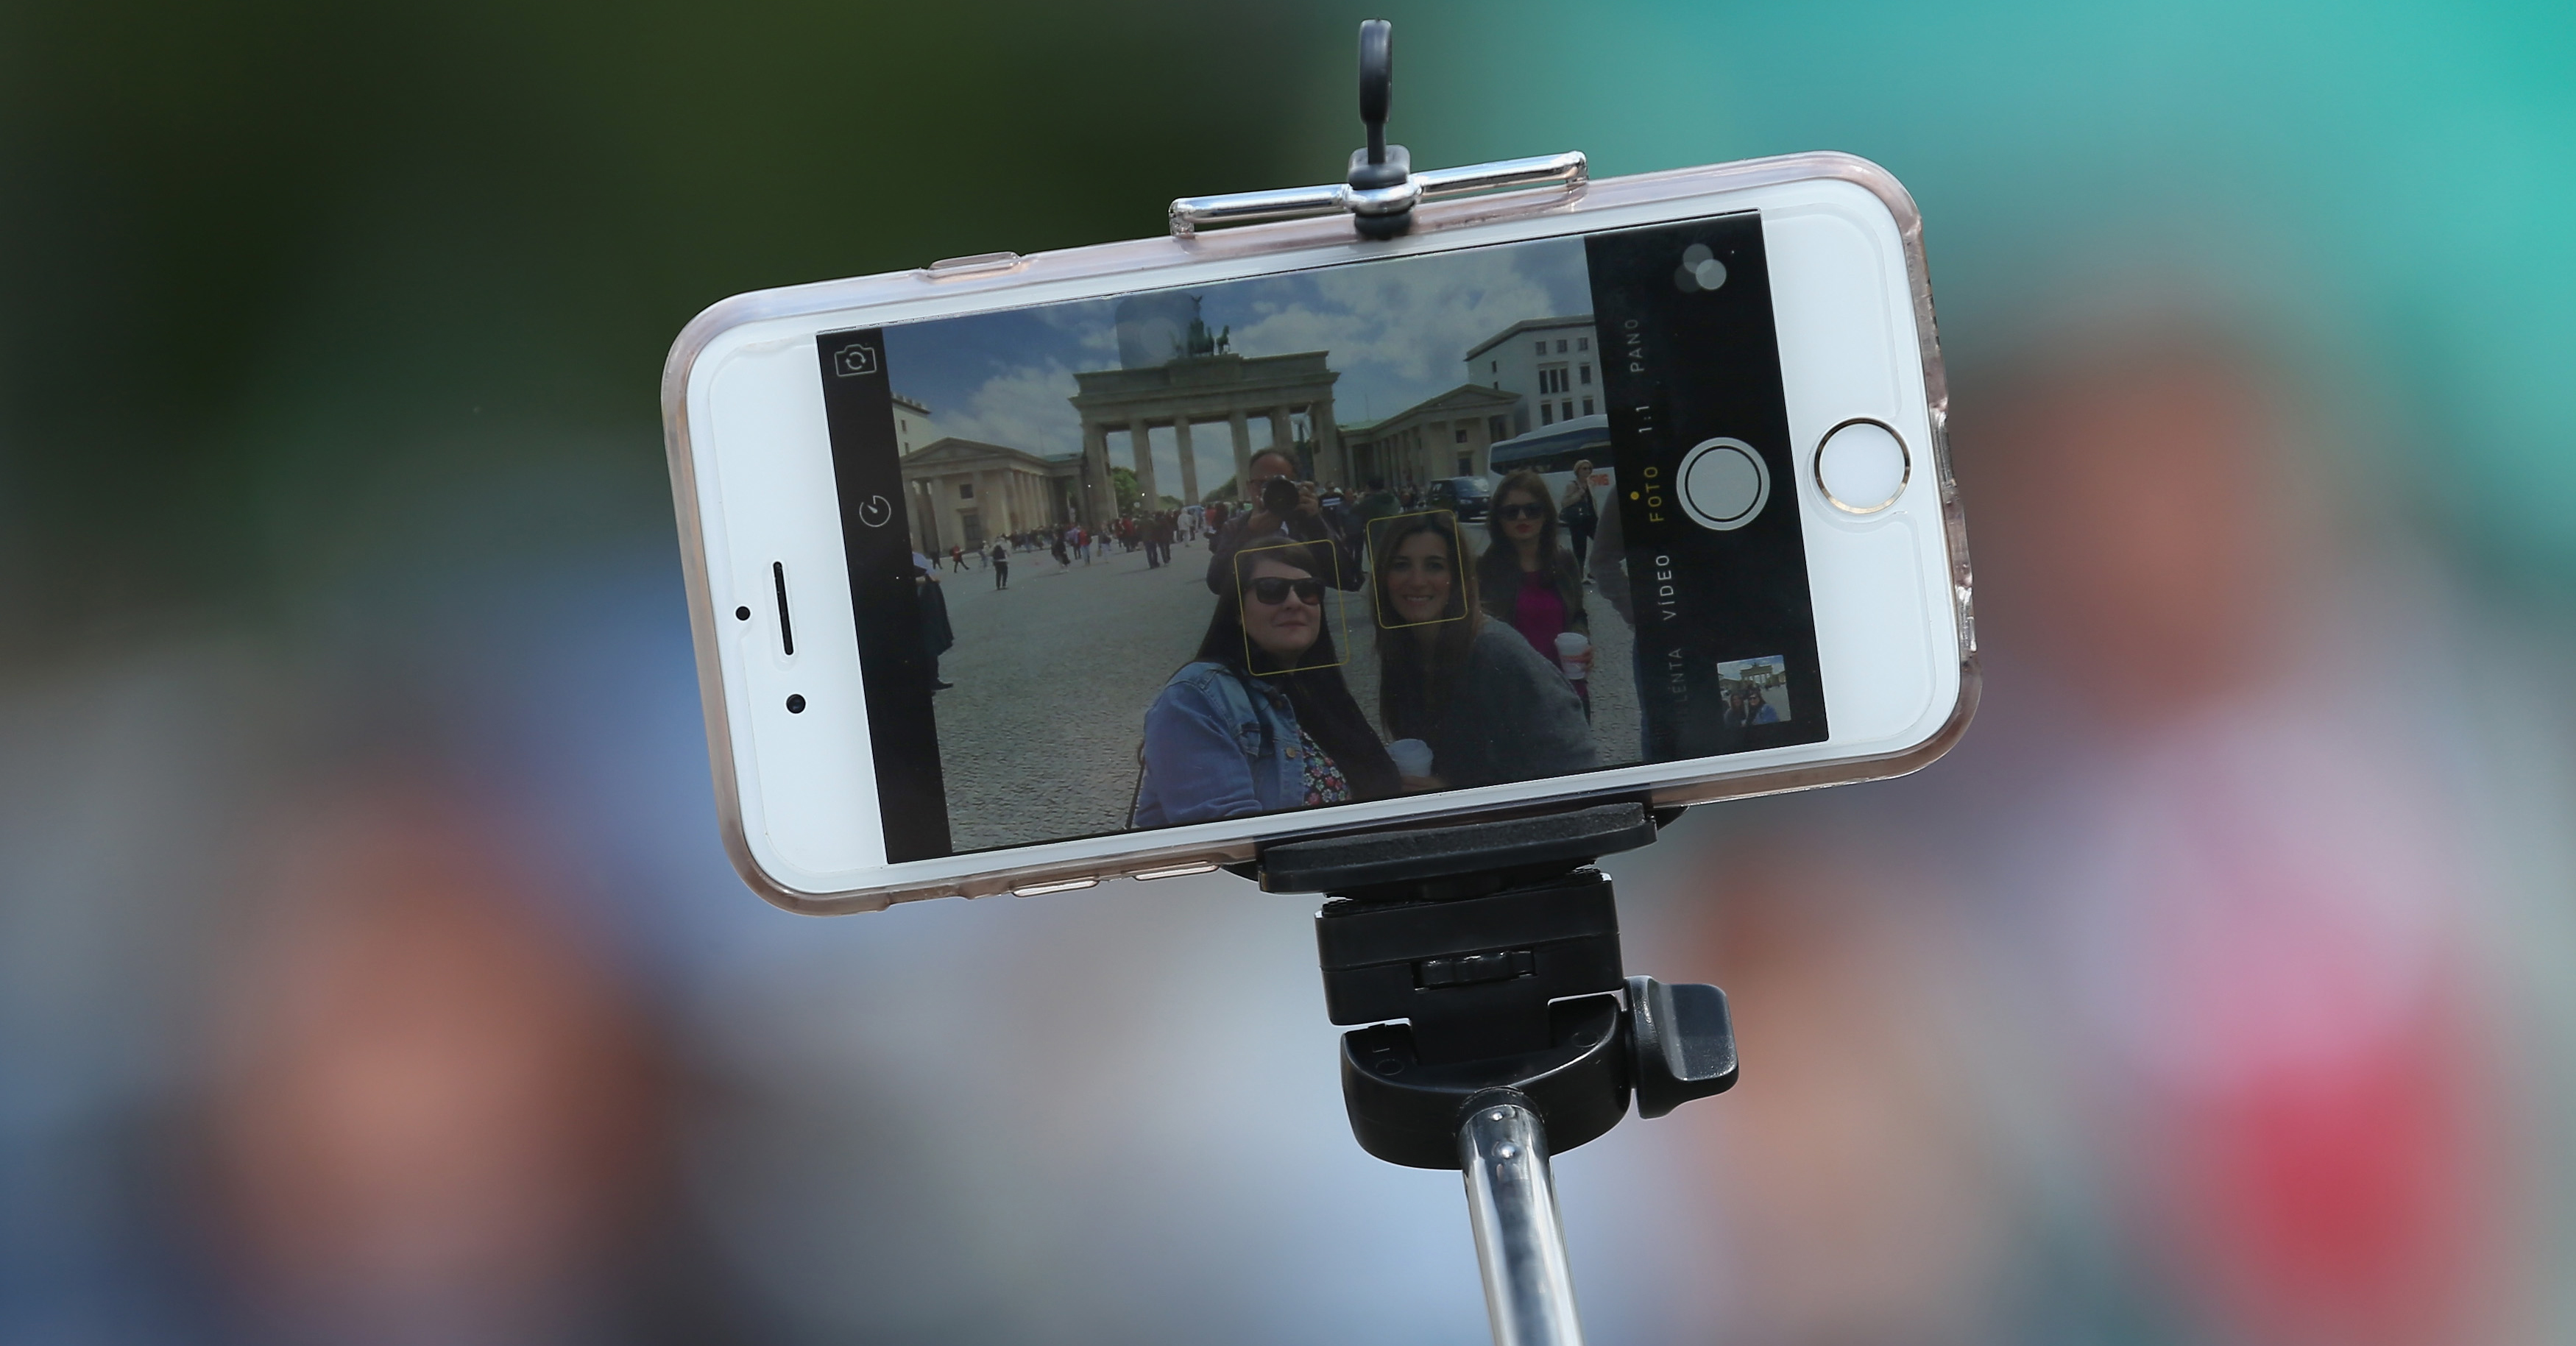 BERLIN, GERMANY - MAY 19:  Tourists photograph themselves with a smartphone attached to a selfie stick at the Brandenburg Gate on May 19, 2015 in Berlin, Germany. Selfie sticks are becoming a common site across the globe and some museums and other tourist attractions have banned them.   (Photo by Sean Gallup/Getty Images)